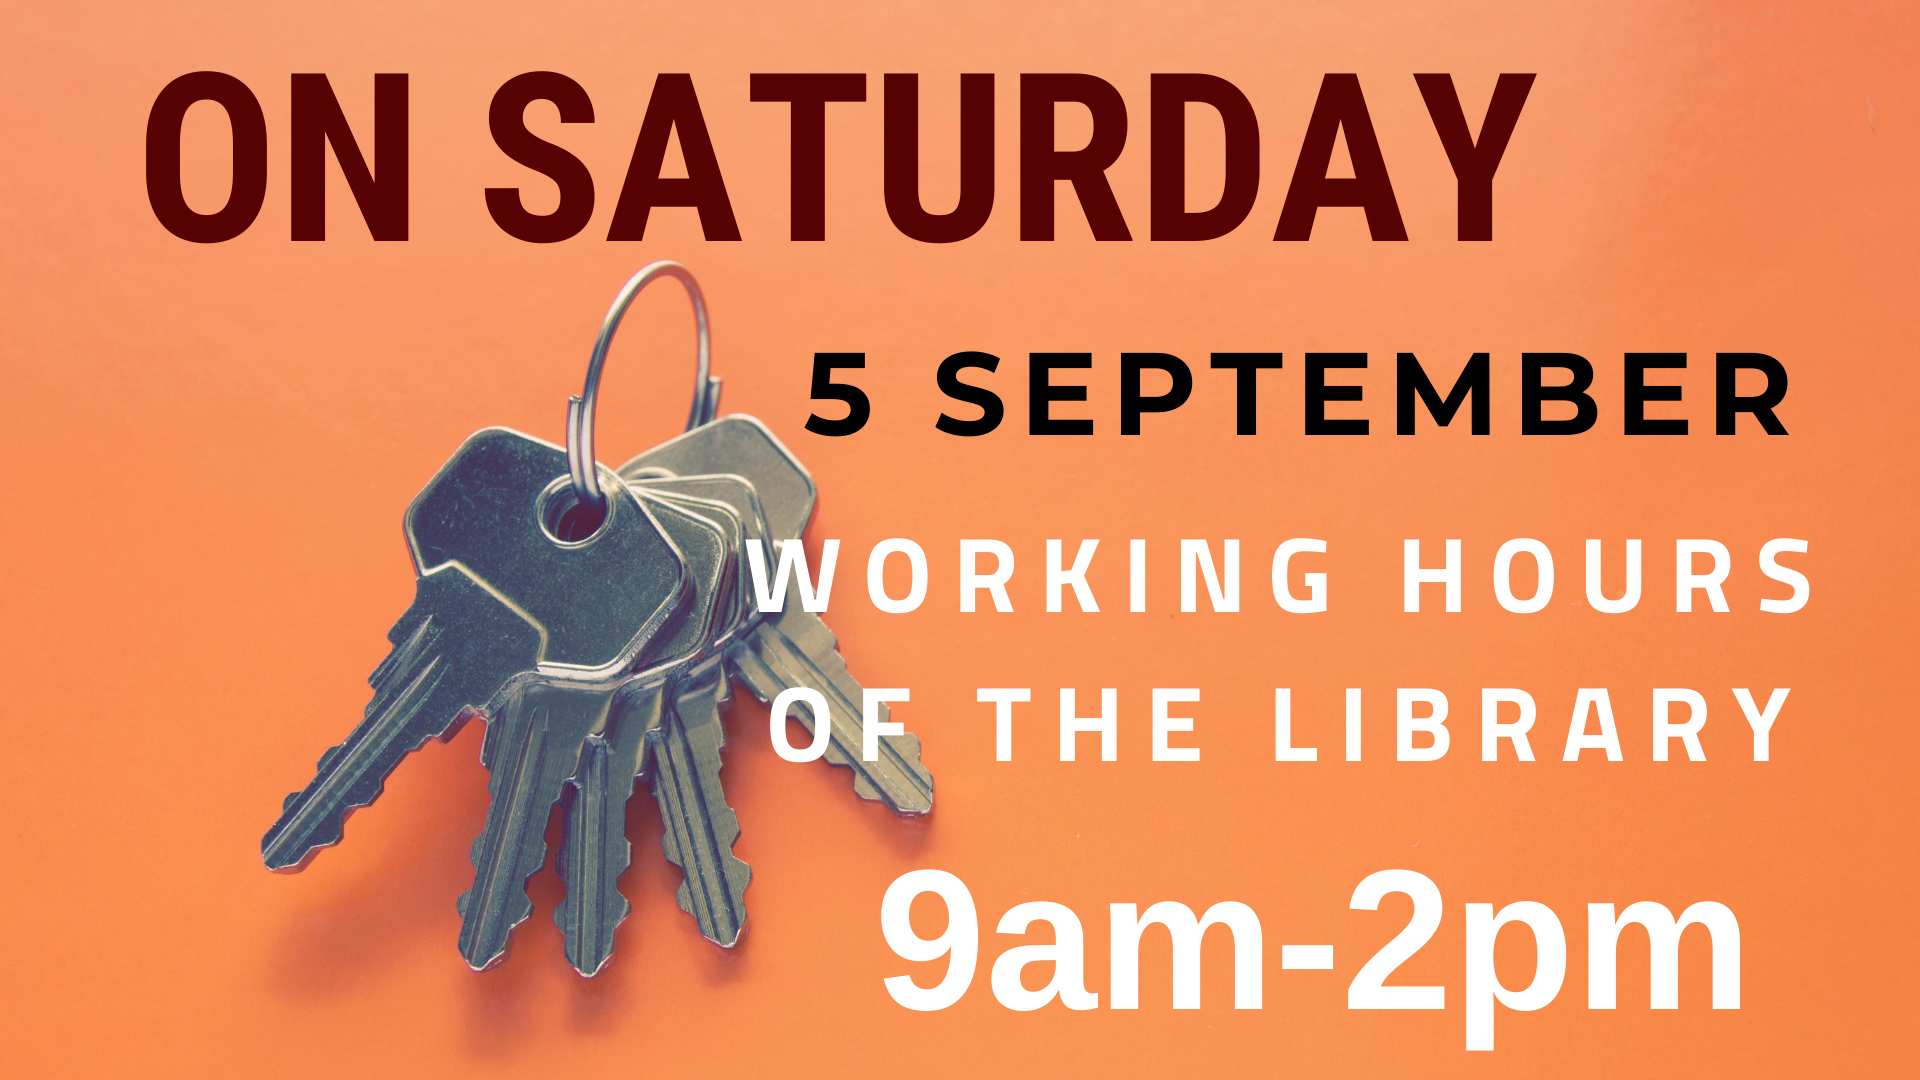 On Saturday 5 September our library is open from 9am until 2pm